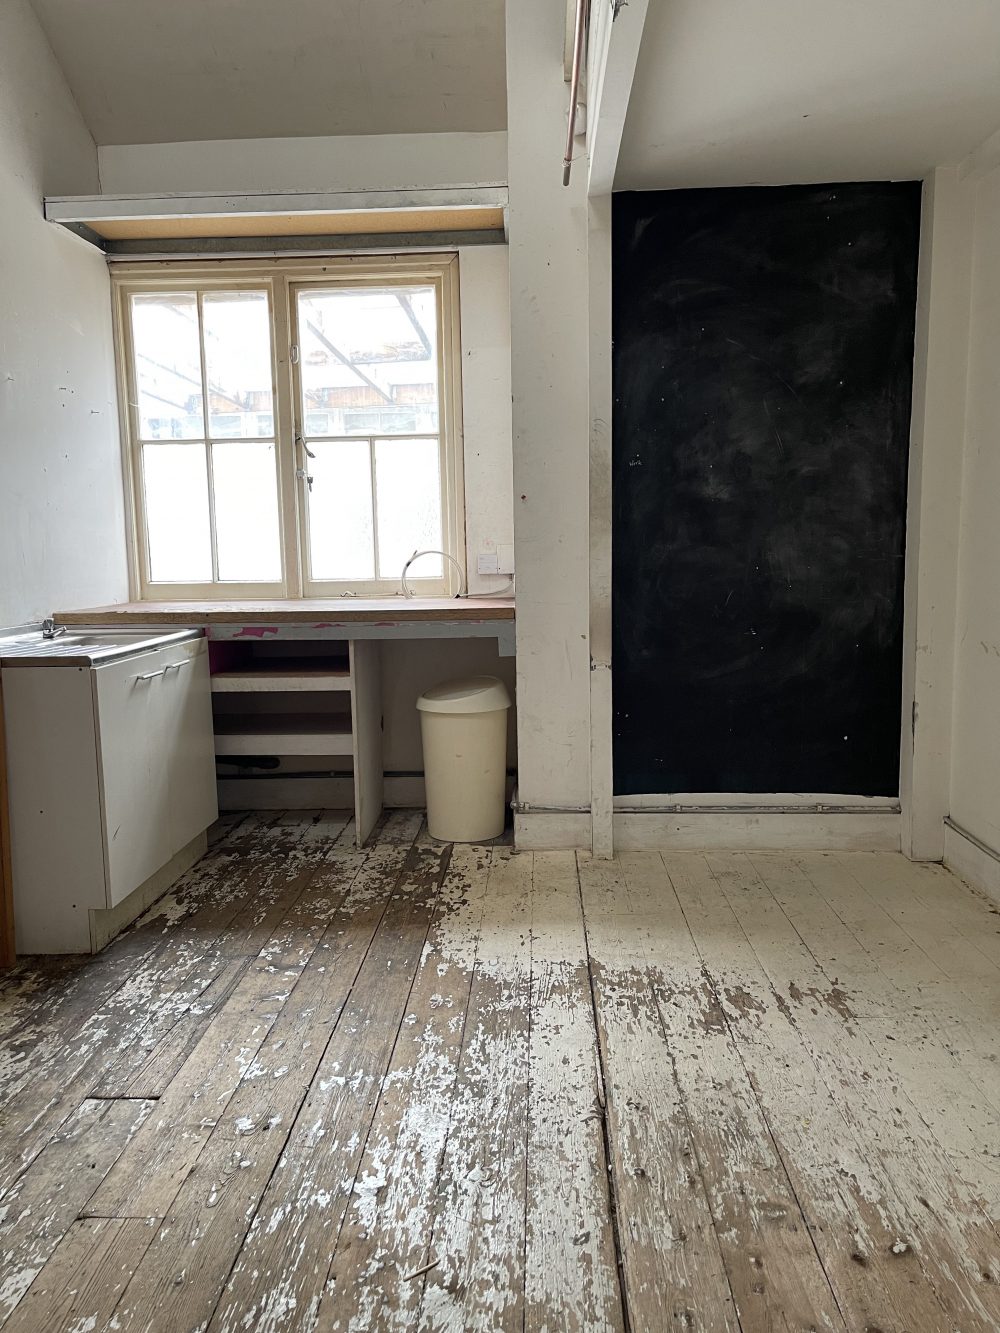 Creative Art Studio Available To rent in N16 Shelfrod Place London Unit 51 Pic10